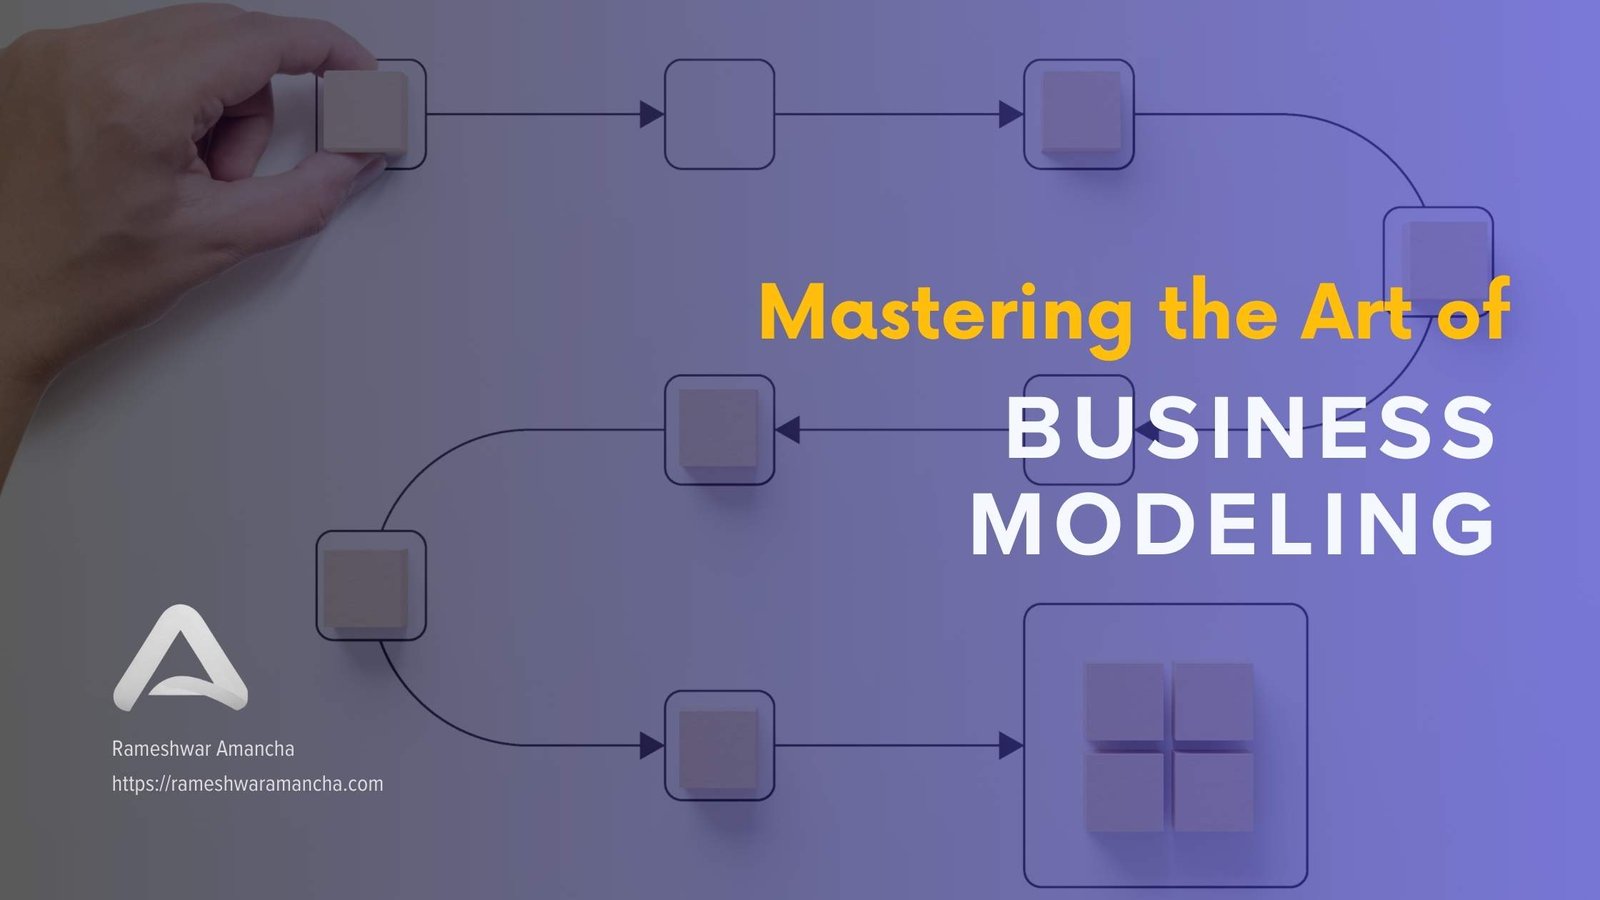 Mastering the Art of Business Modeling